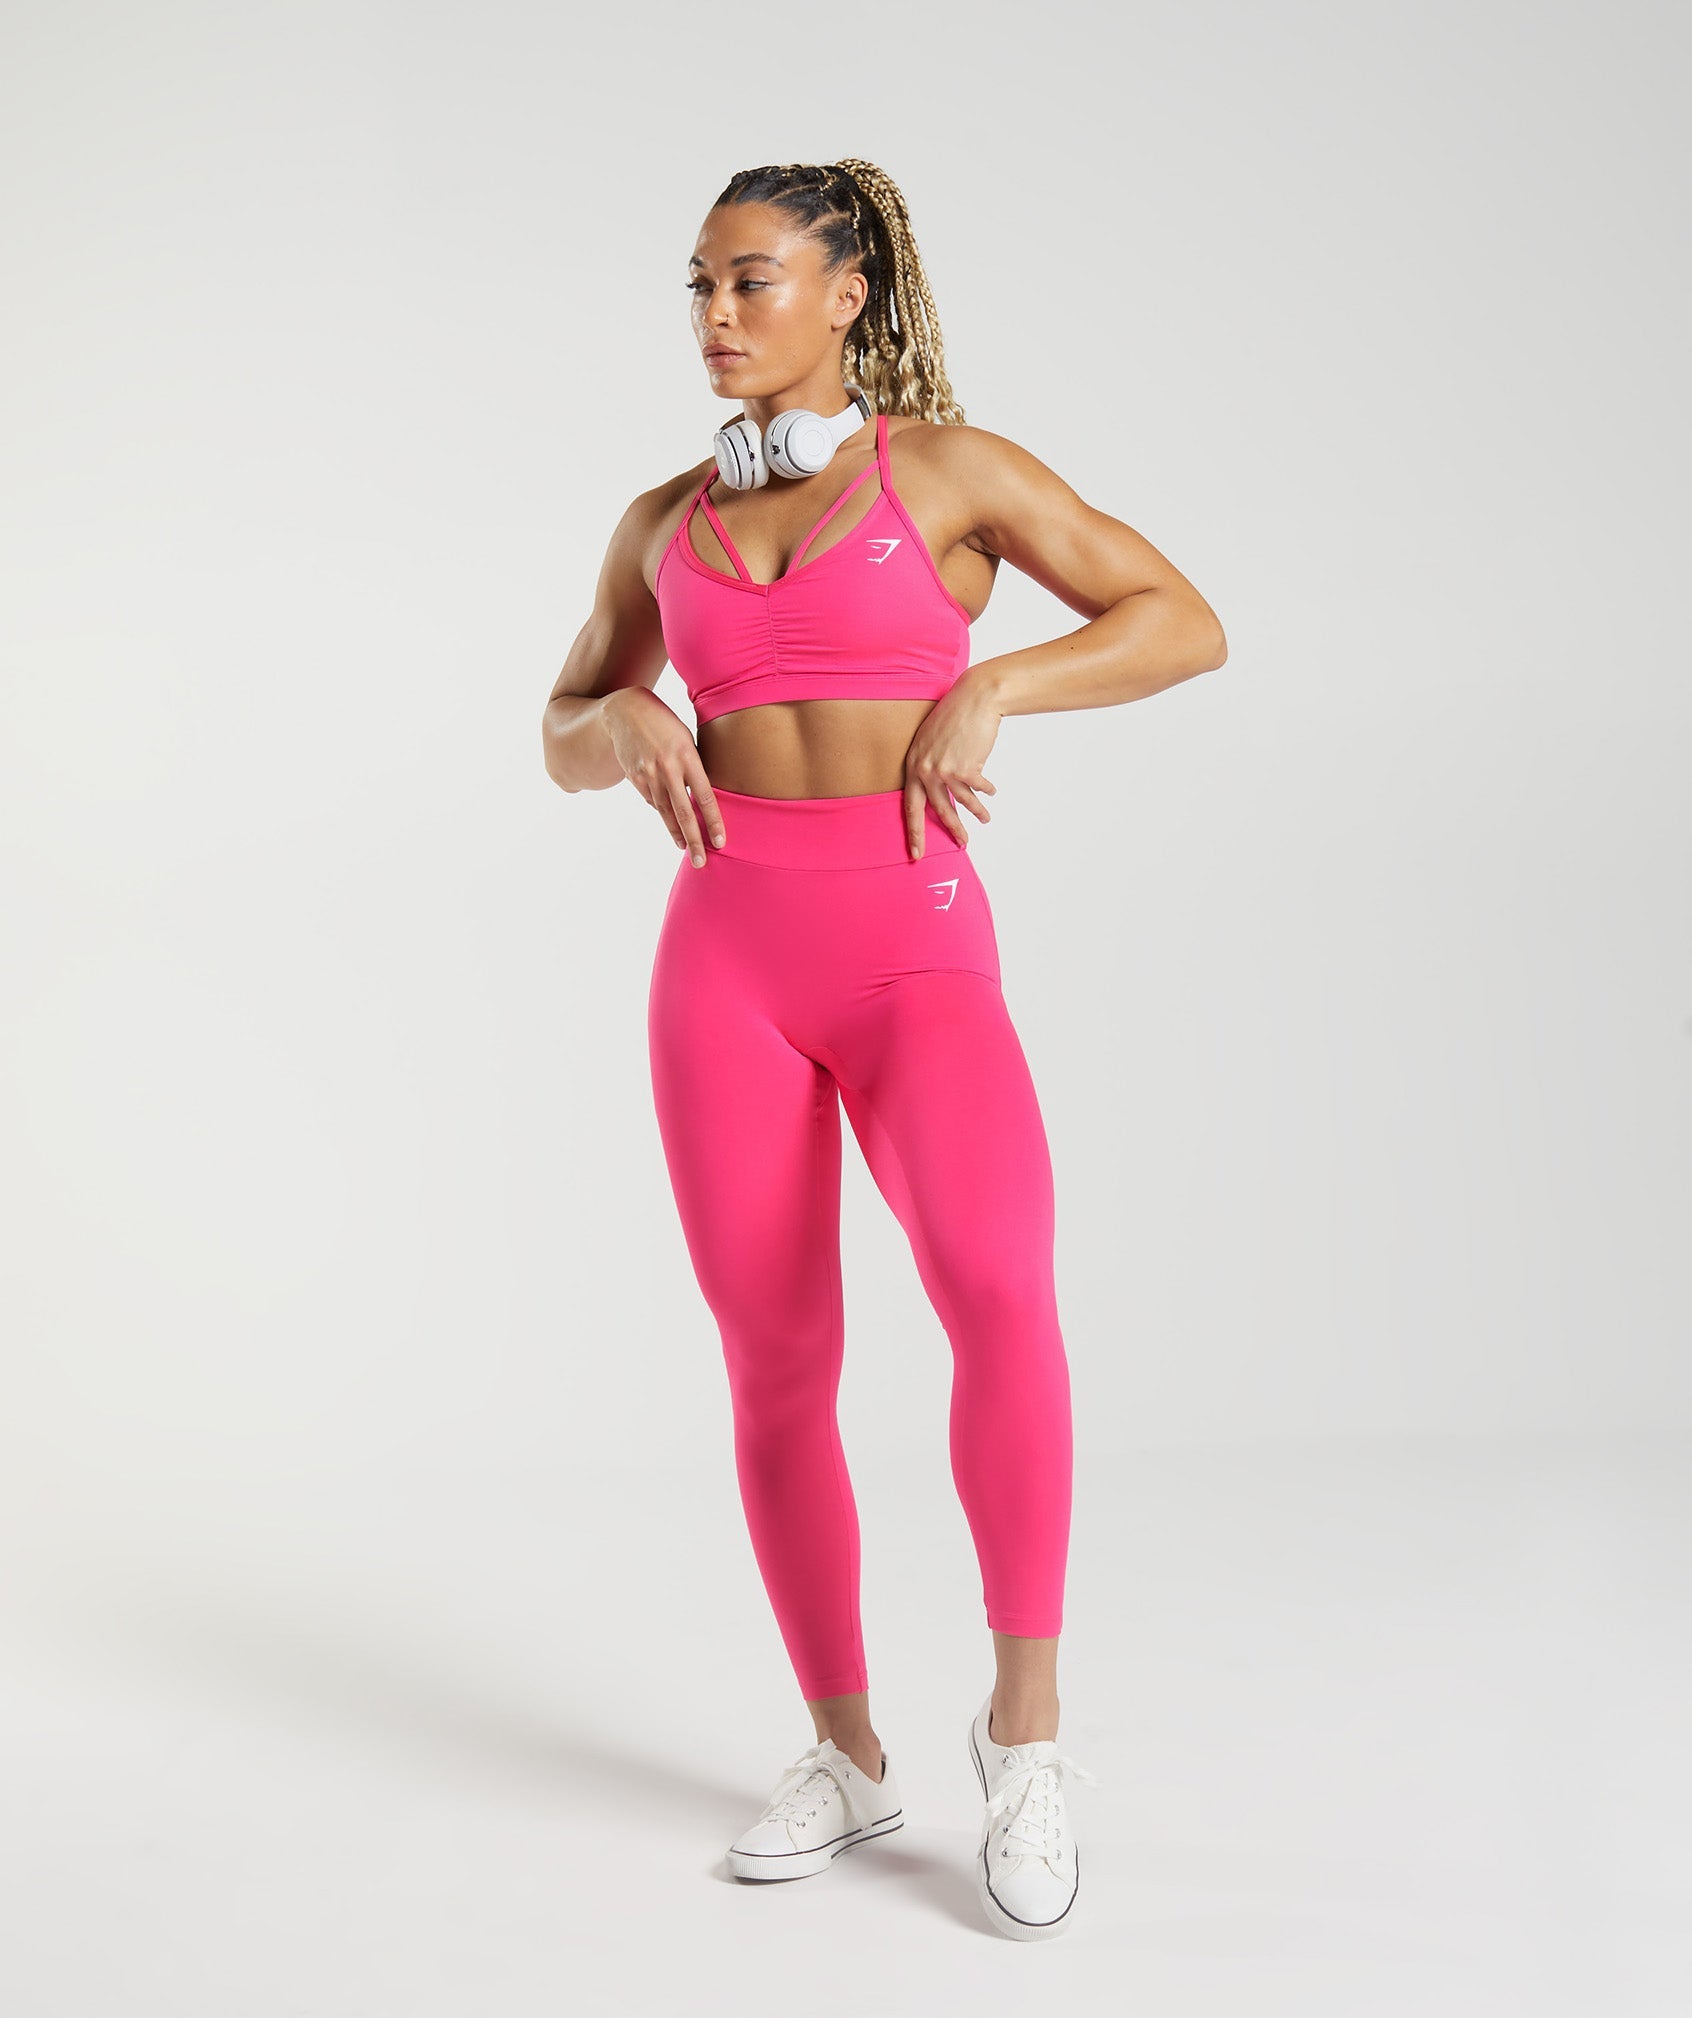 Cute all pink workout outfit  Womens workout outfits, Stay fit